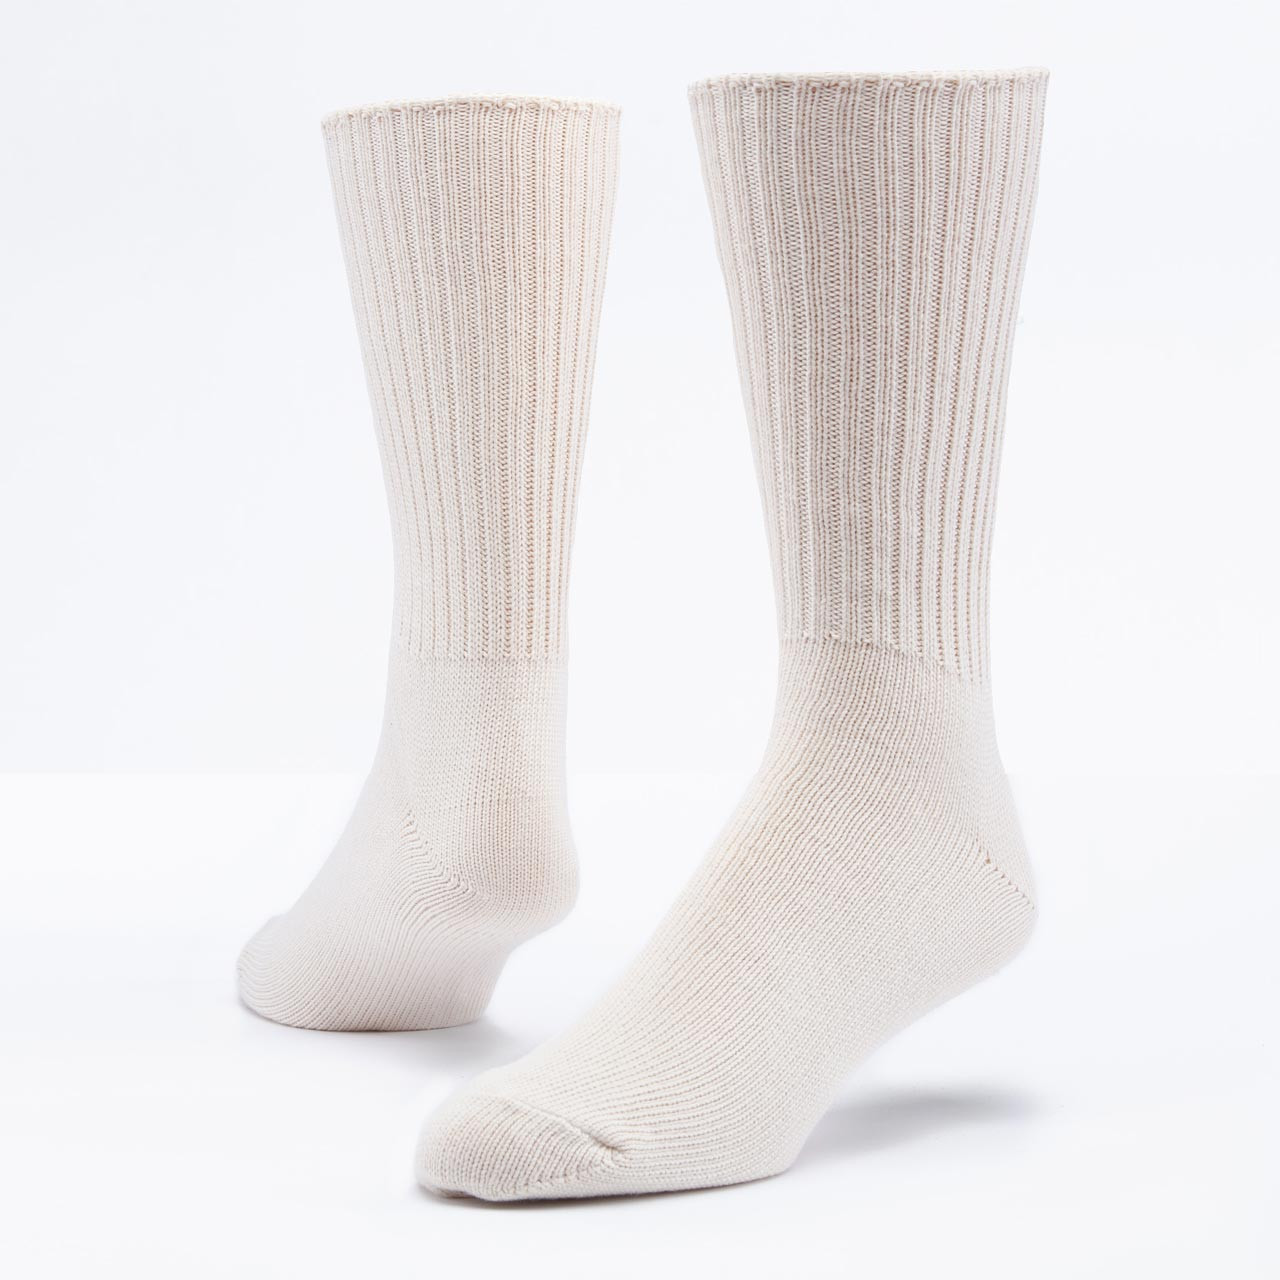 Loose Fit Stays Up Crew Athletic Socks in White 